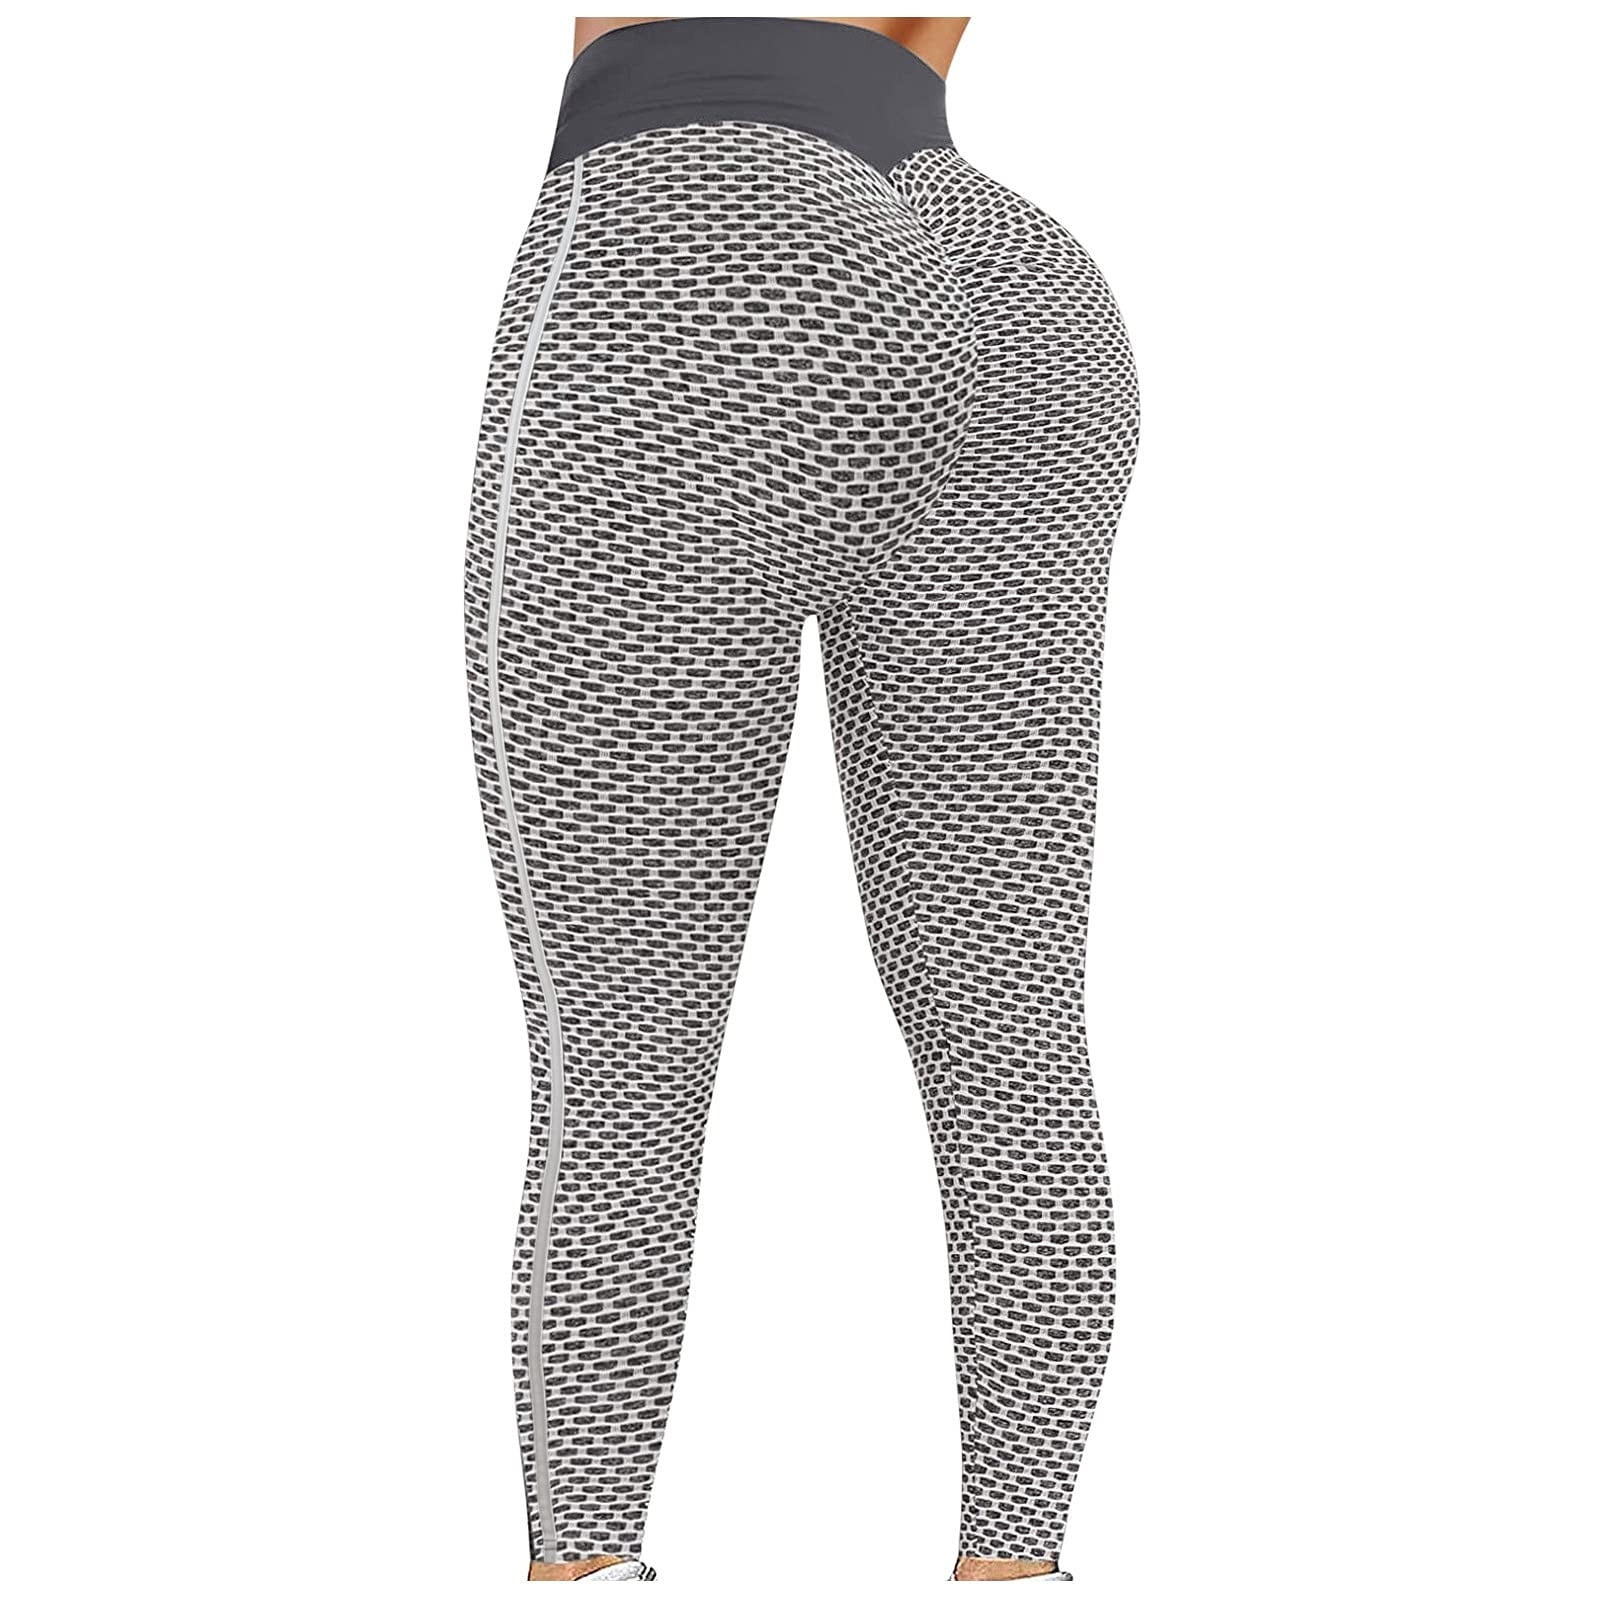 Textured Chilled Out Legging, Houndstooth